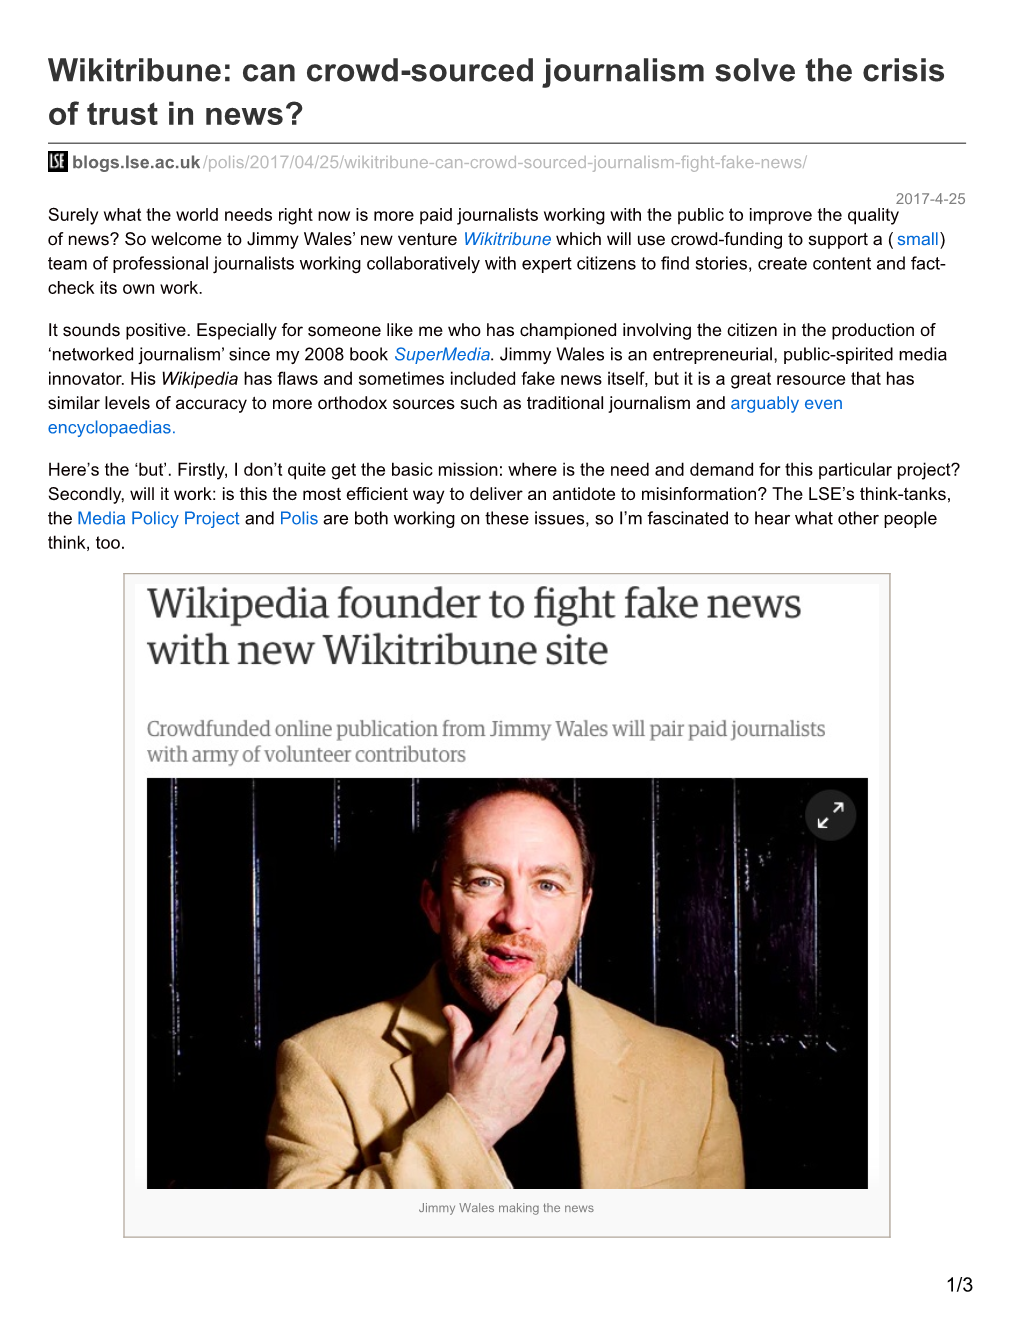 Wikitribune: Can Crowd-Sourced Journalism Solve the Crisis of Trust in News?